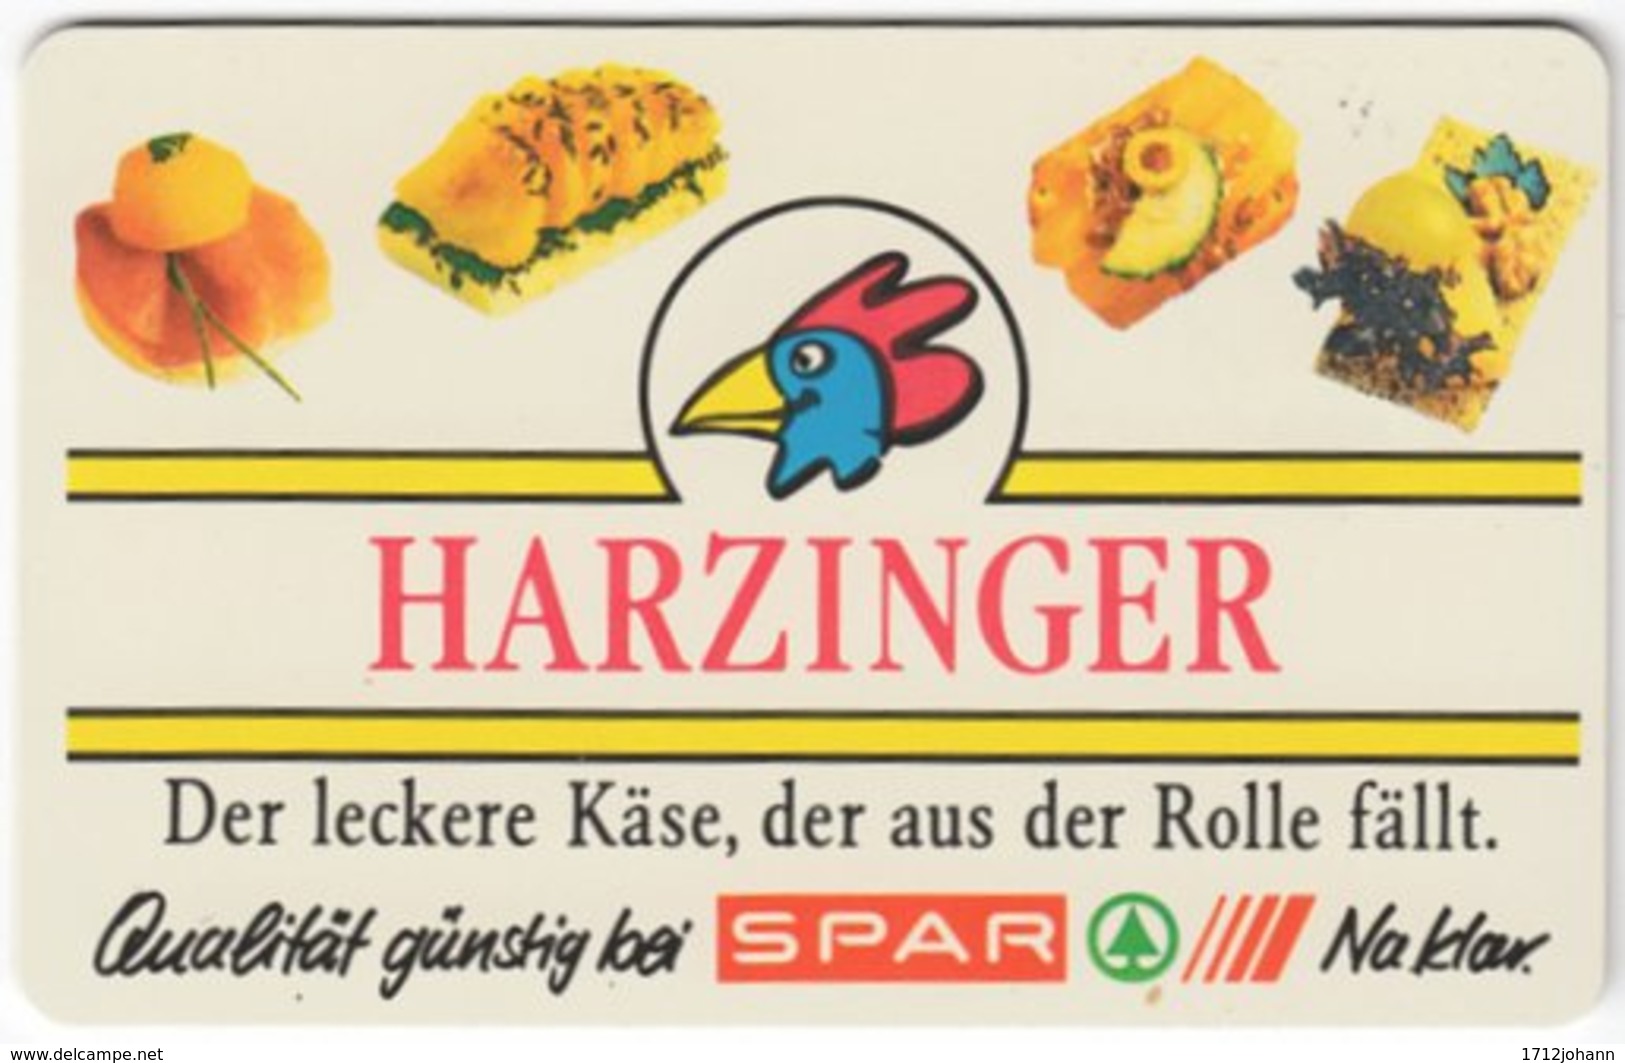 GERMANY K-Serie A-293 - 290 04.93 - Food, Cheese / Traffic, Truck - MINT - K-Series: Kundenserie